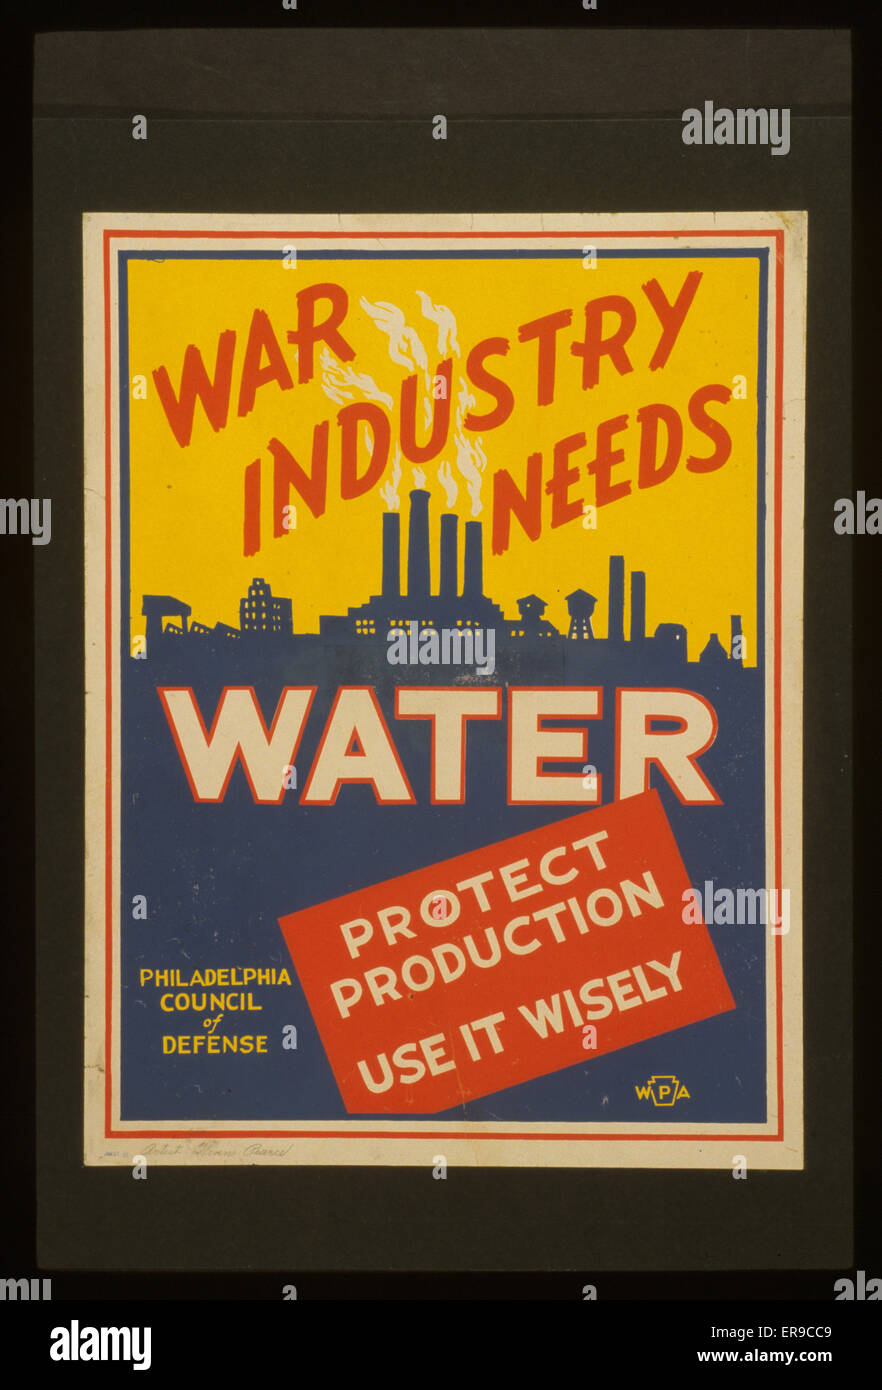 War industry needs water Protect production : Use it wisely Stock Photo